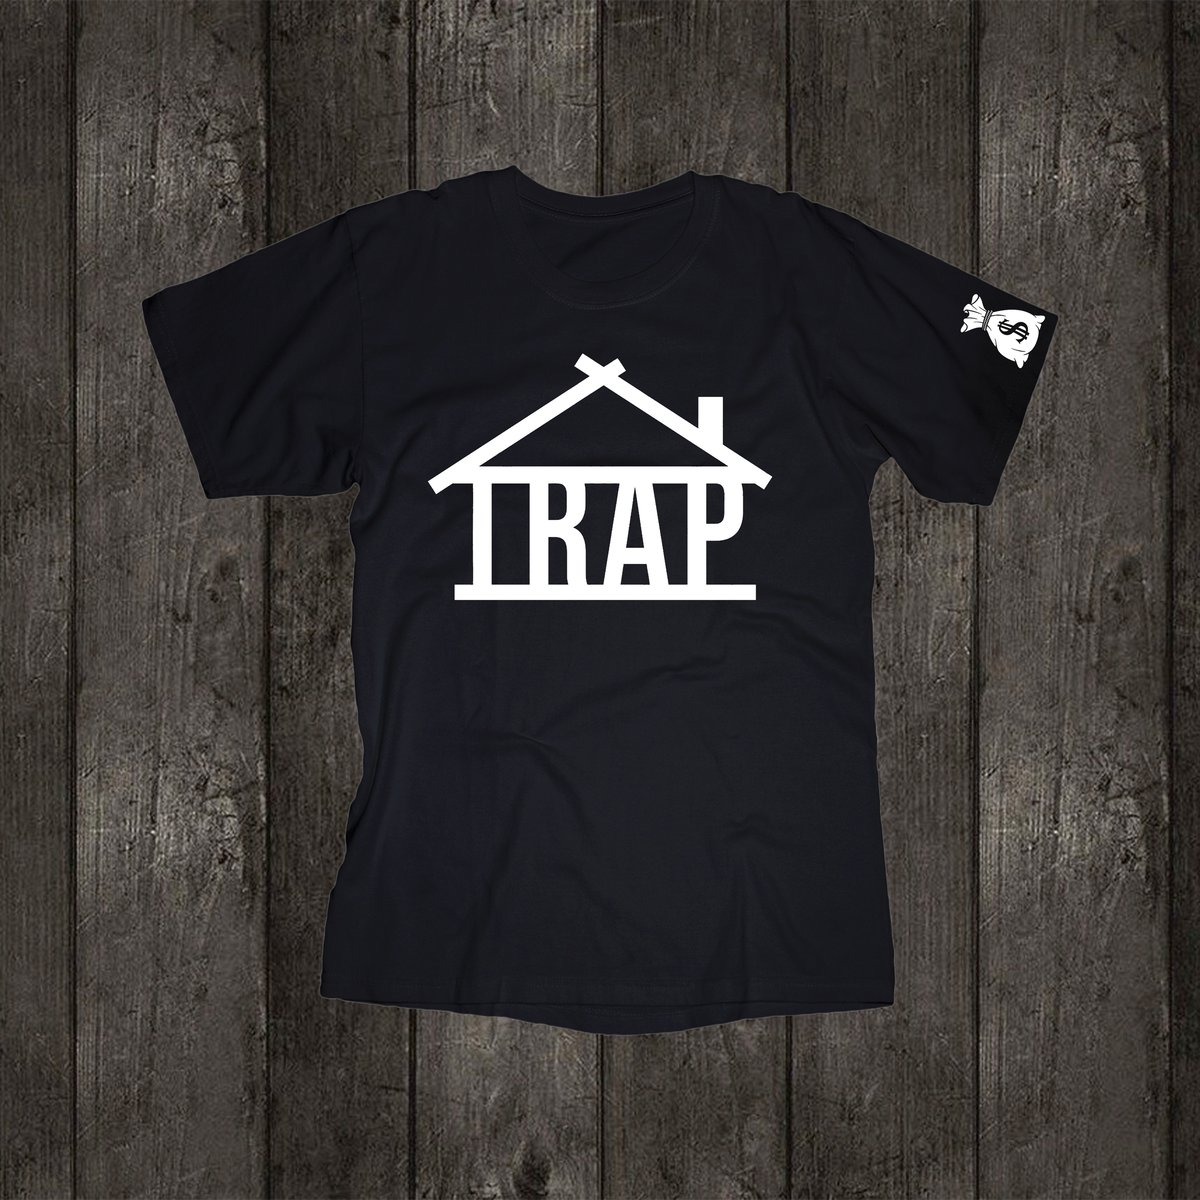 TRAP HOUSE - Graphic T-Shirt, Funny Parody Tee, Quirky Gift, DTG Printed T  Shirt